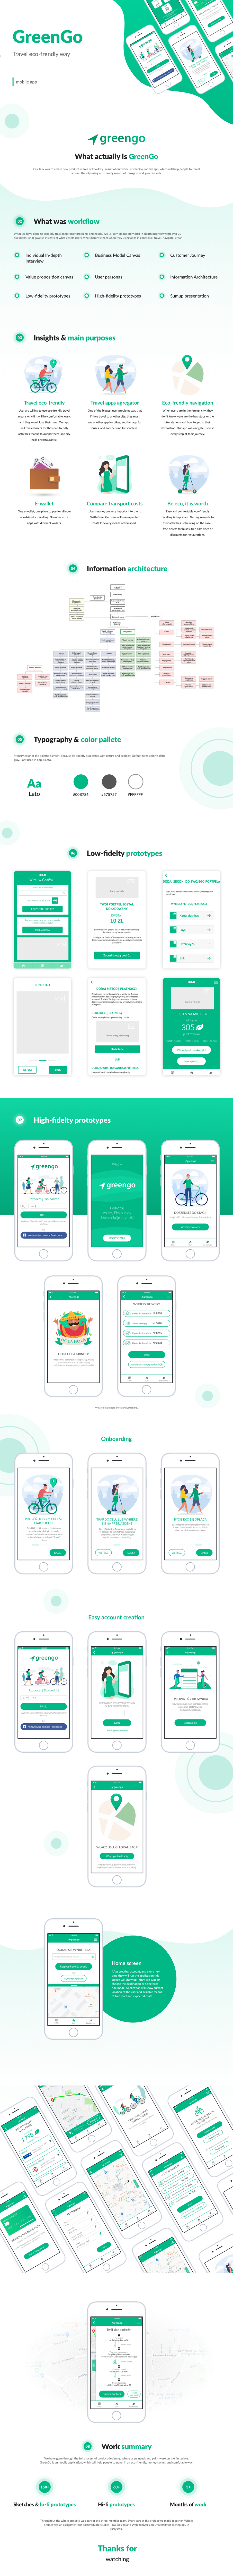 GreenGo - mobile application for eco-friendly travelling